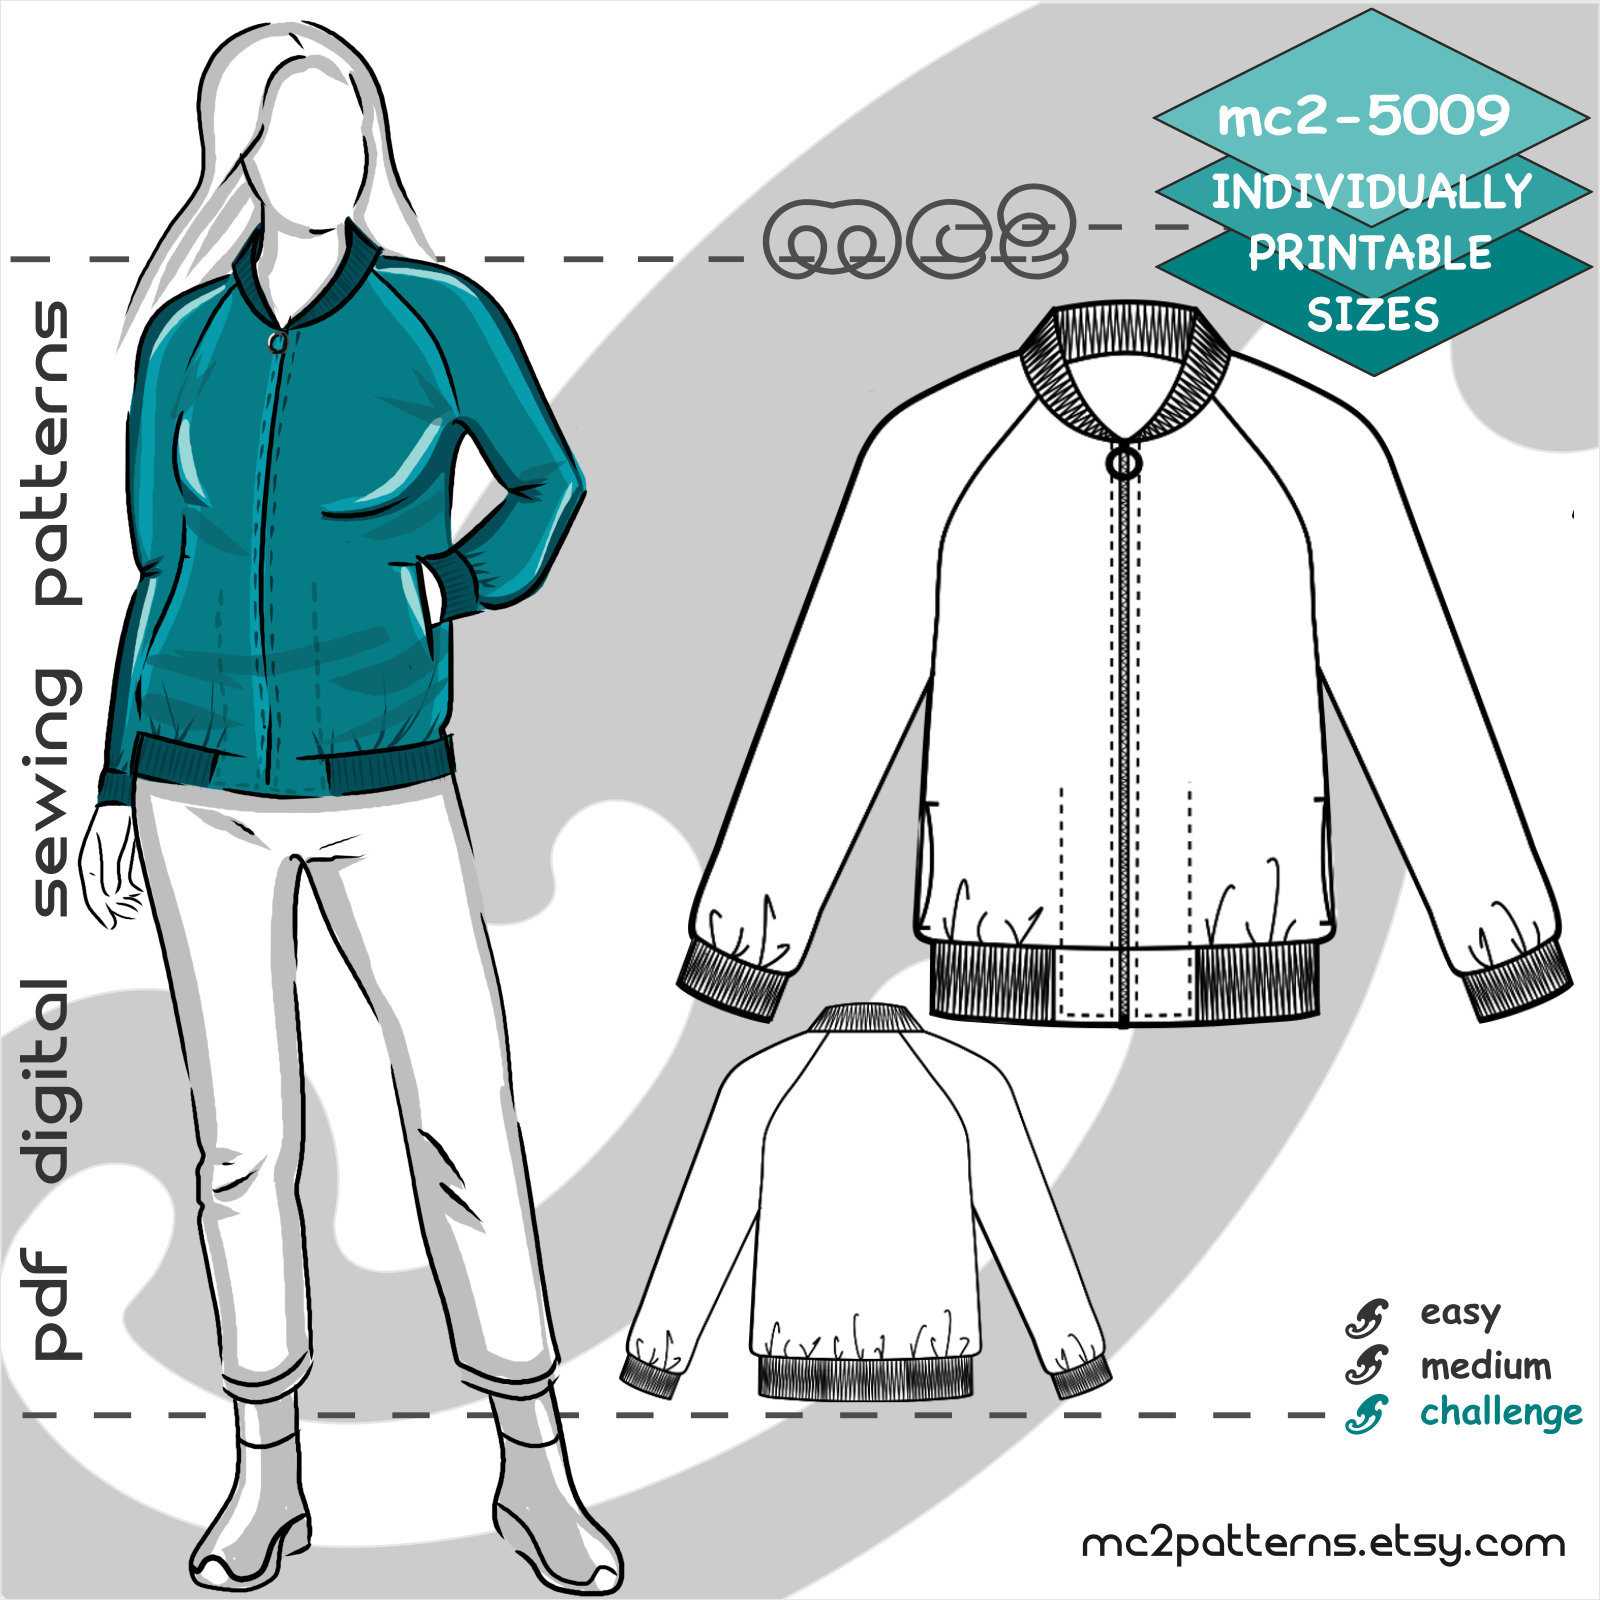 42+ Designs sewing pattern mens bomber jacket - LoaieCaoimhin